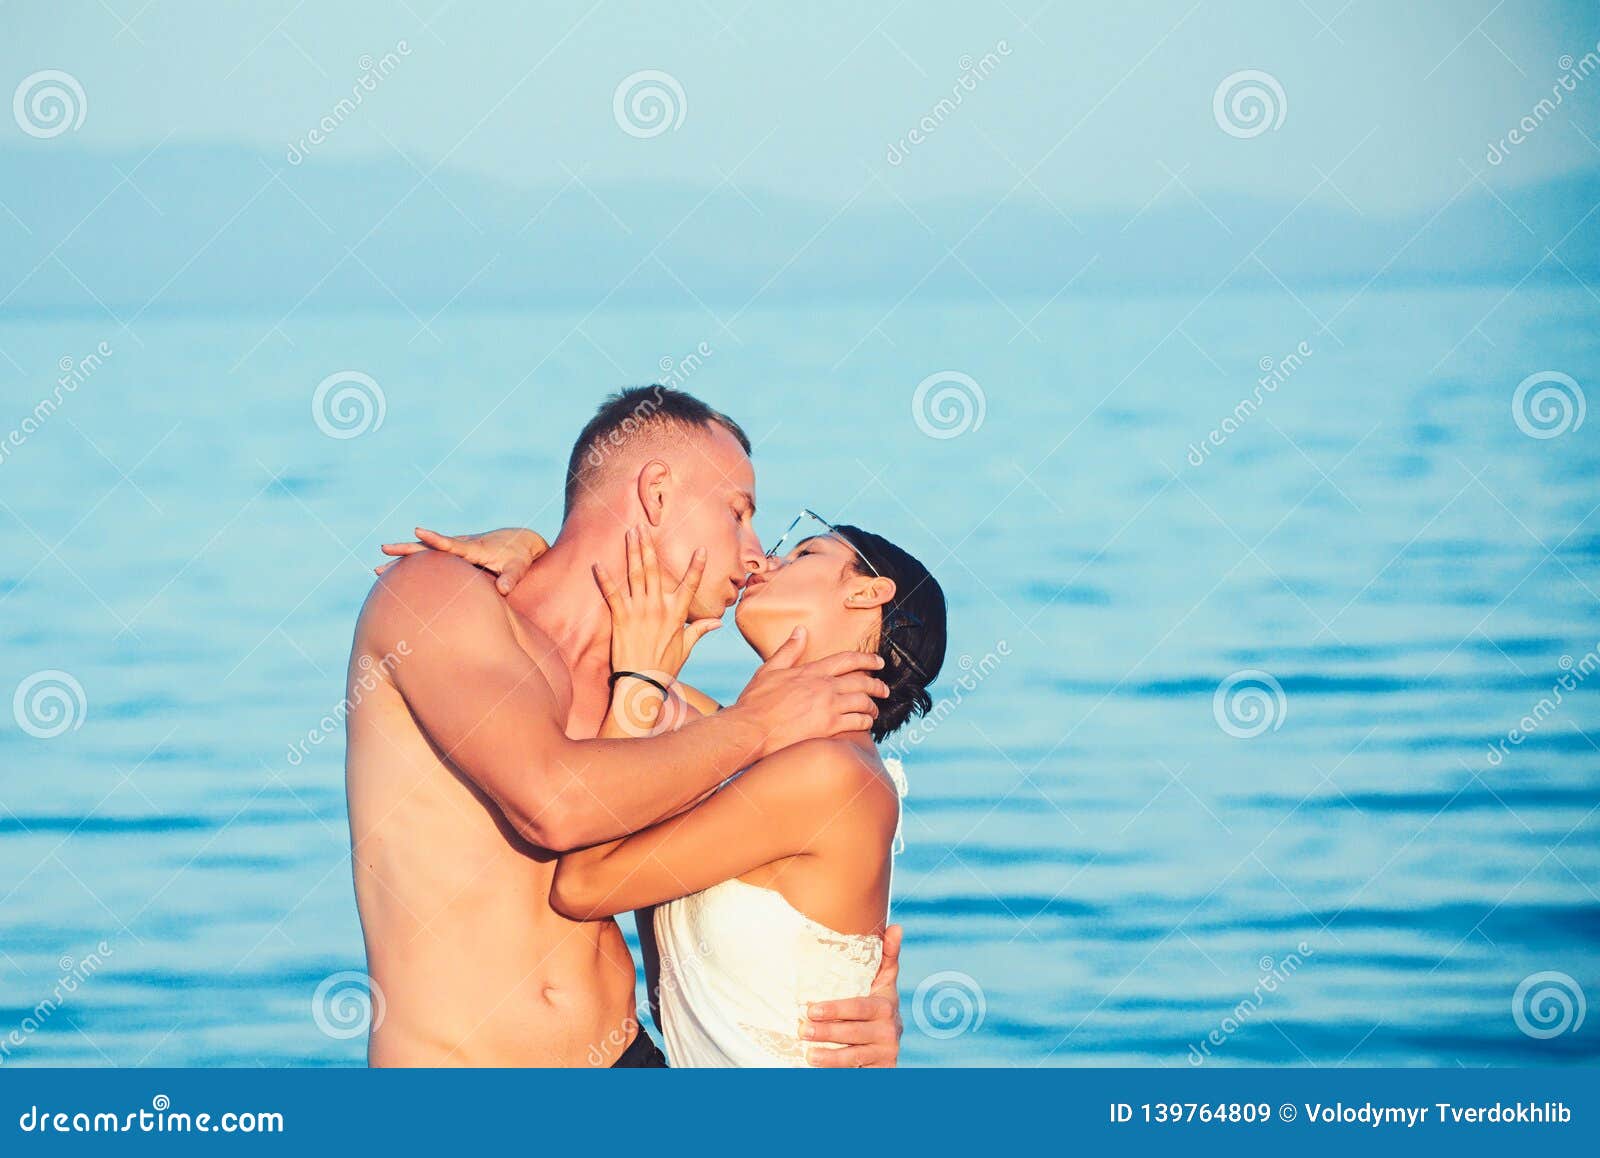 Couple In The Water Kissing And Embracing Stock Image Image Of